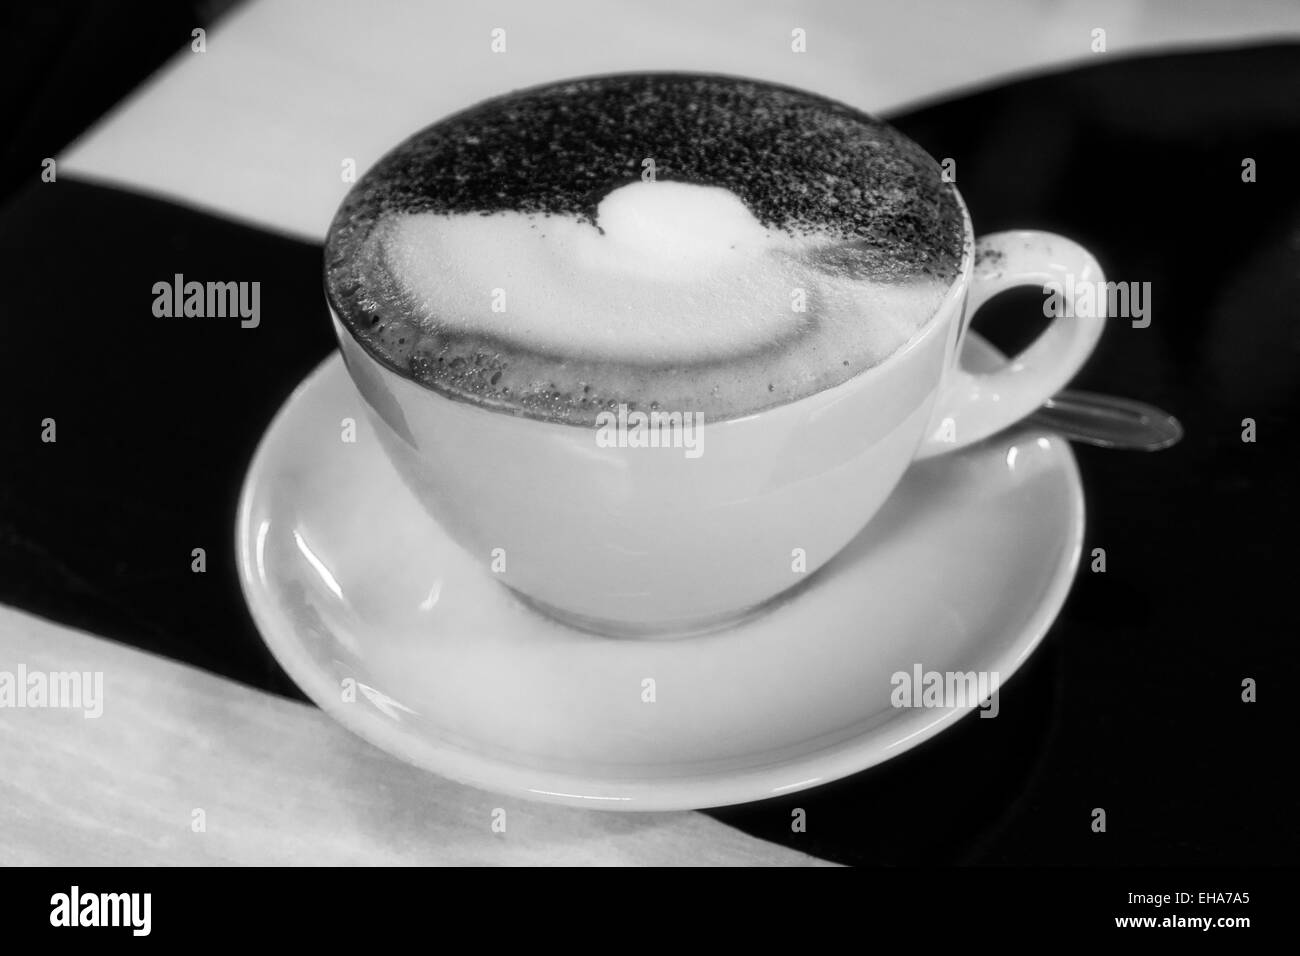 Creamy cappuccino with chocolate sprinkled on top. Black and white. Stock Photo